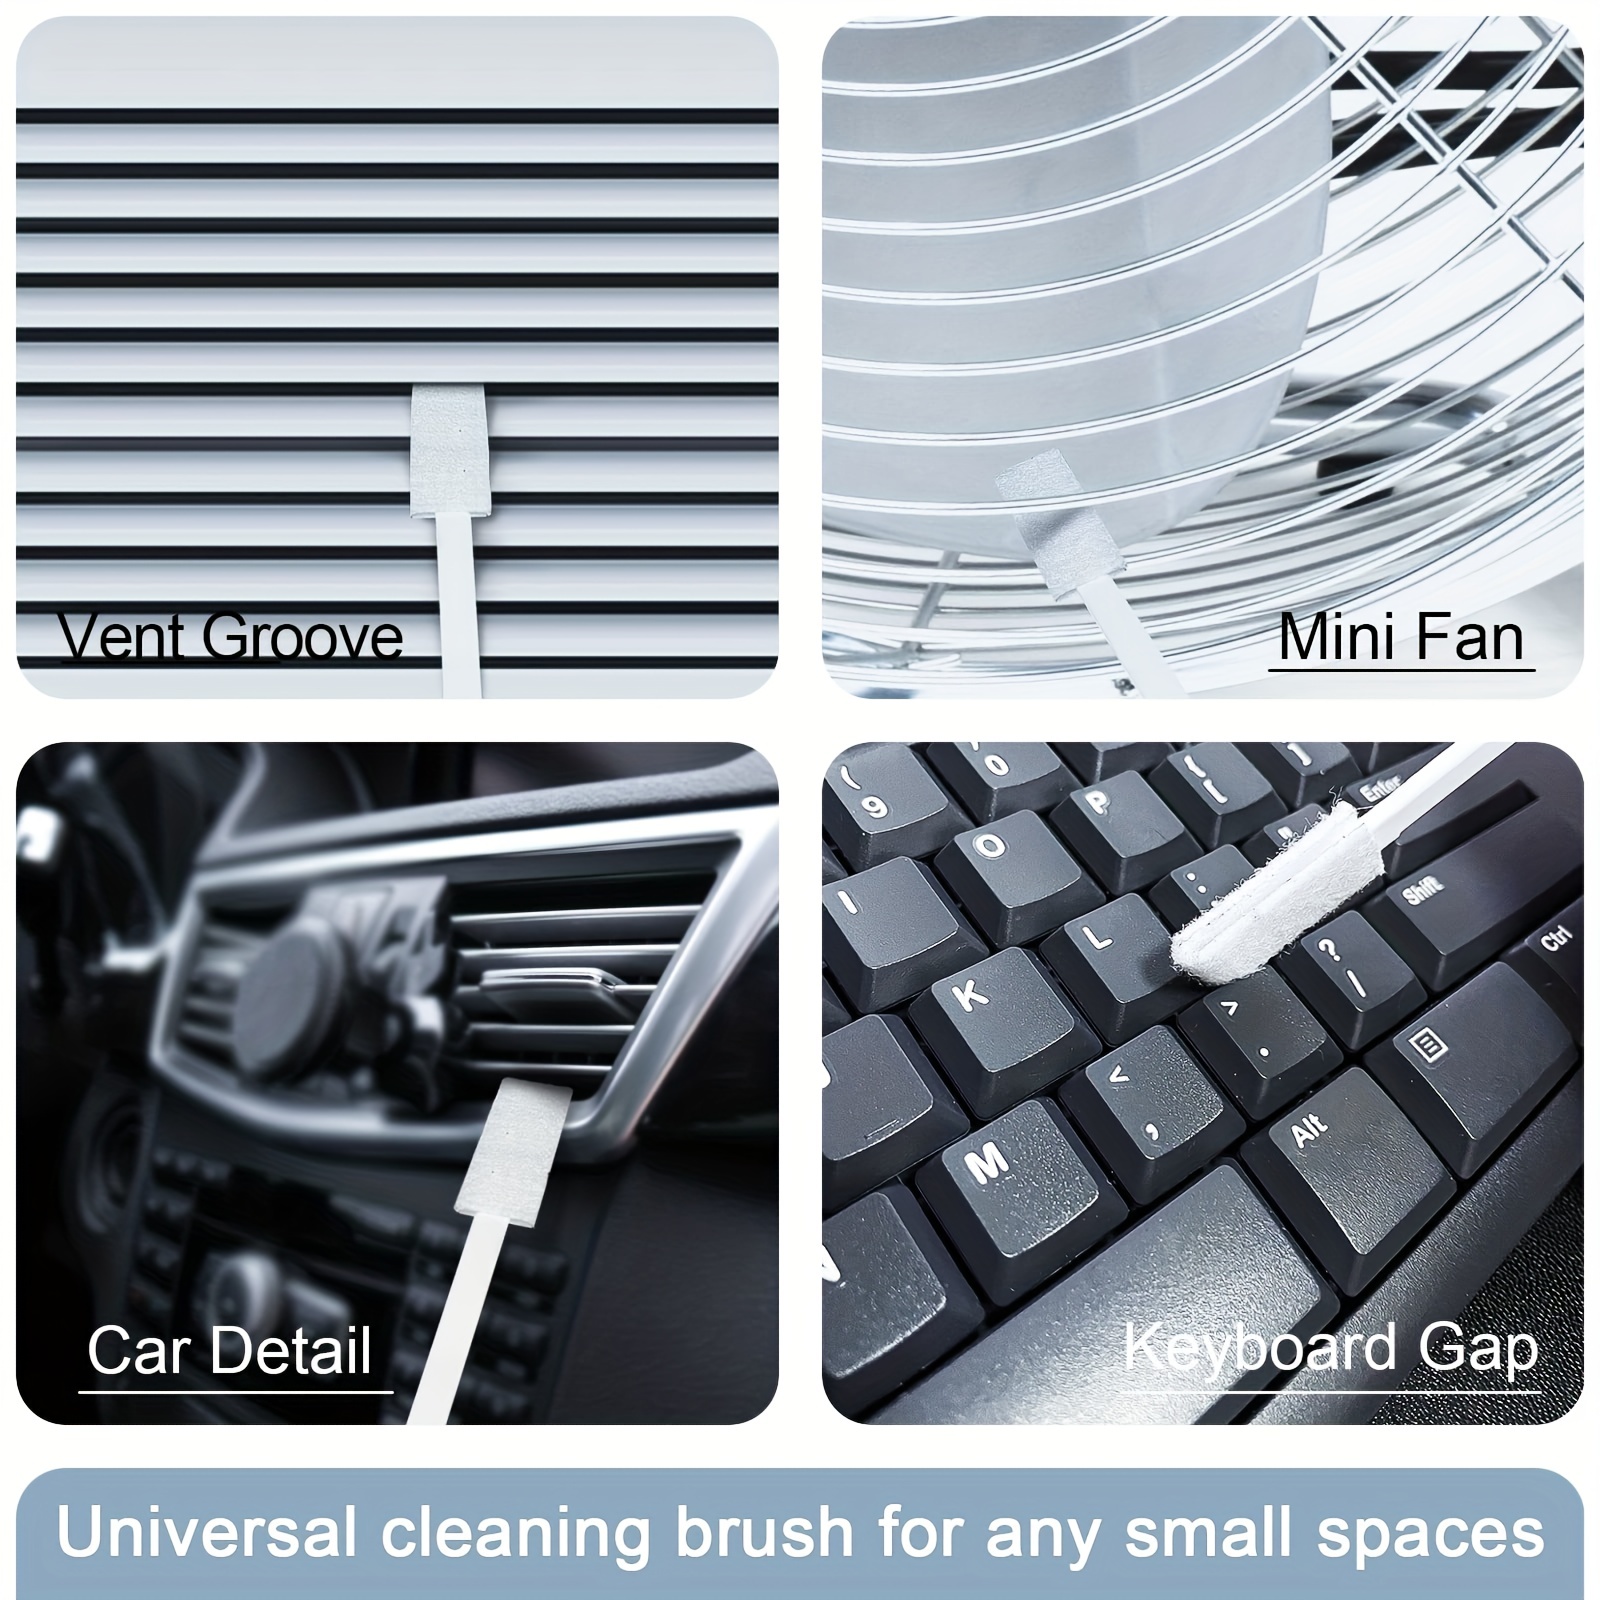  4 Set 28Pcs Small Disposable Crevice Cleaning Brushes for  Toilet Corner,Skinny Gap Cleaner Scrub for Window Groove,Door Track,  Keyboard,Detail Cleansing Brushes for Kitchen Stove,Blind,Air Vent,Fan :  Health & Household